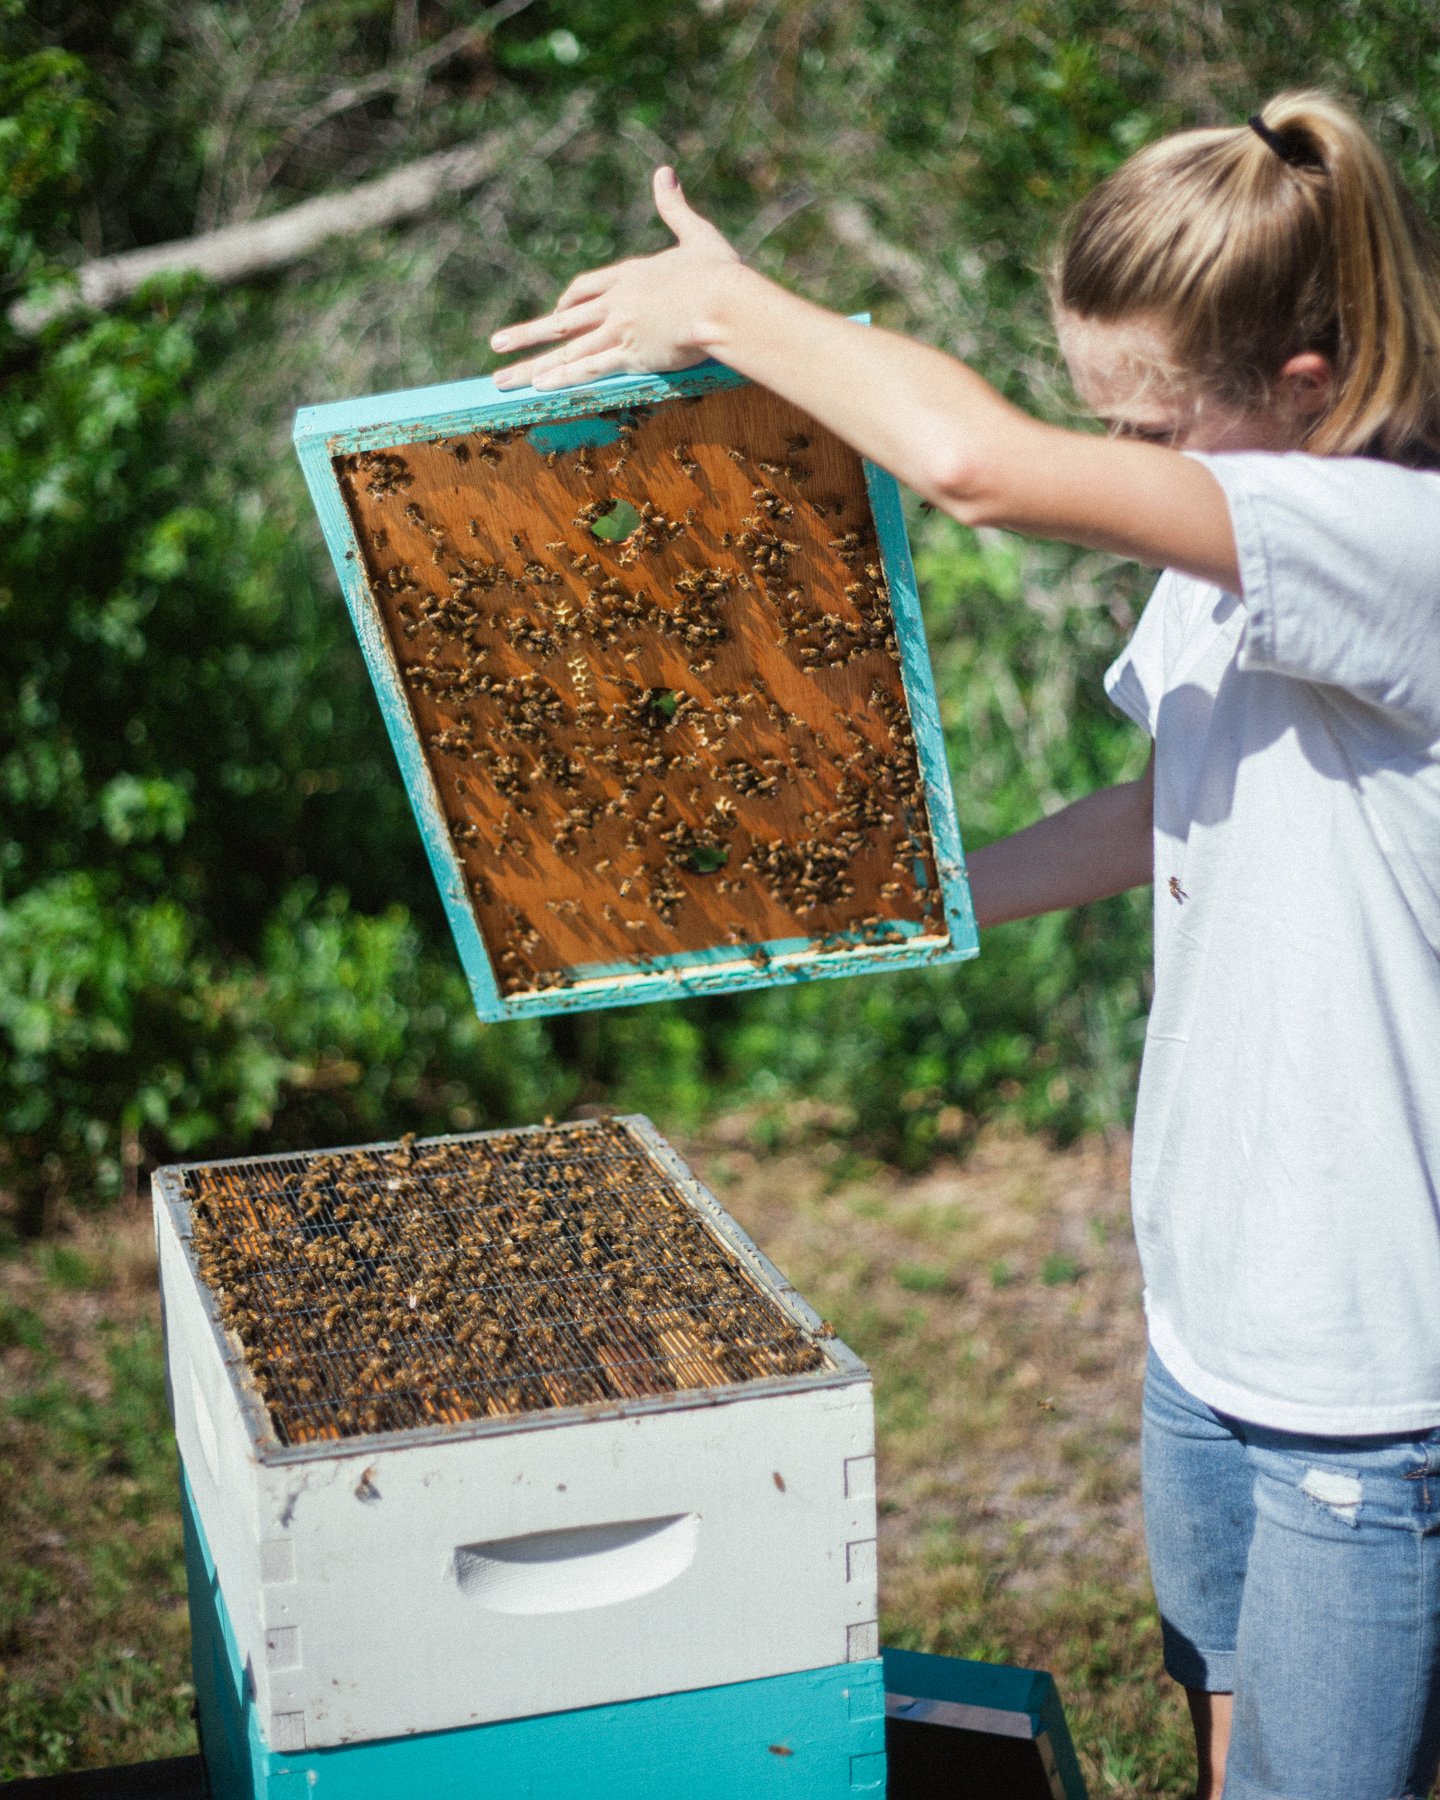  Rylee has been keeping bees since she was five.   “When my dad’s dad was little, he did bees, so they were just always around. My dad showed me through it all, and I kept with it. He’s still involved and every now and then my brother will help.” 